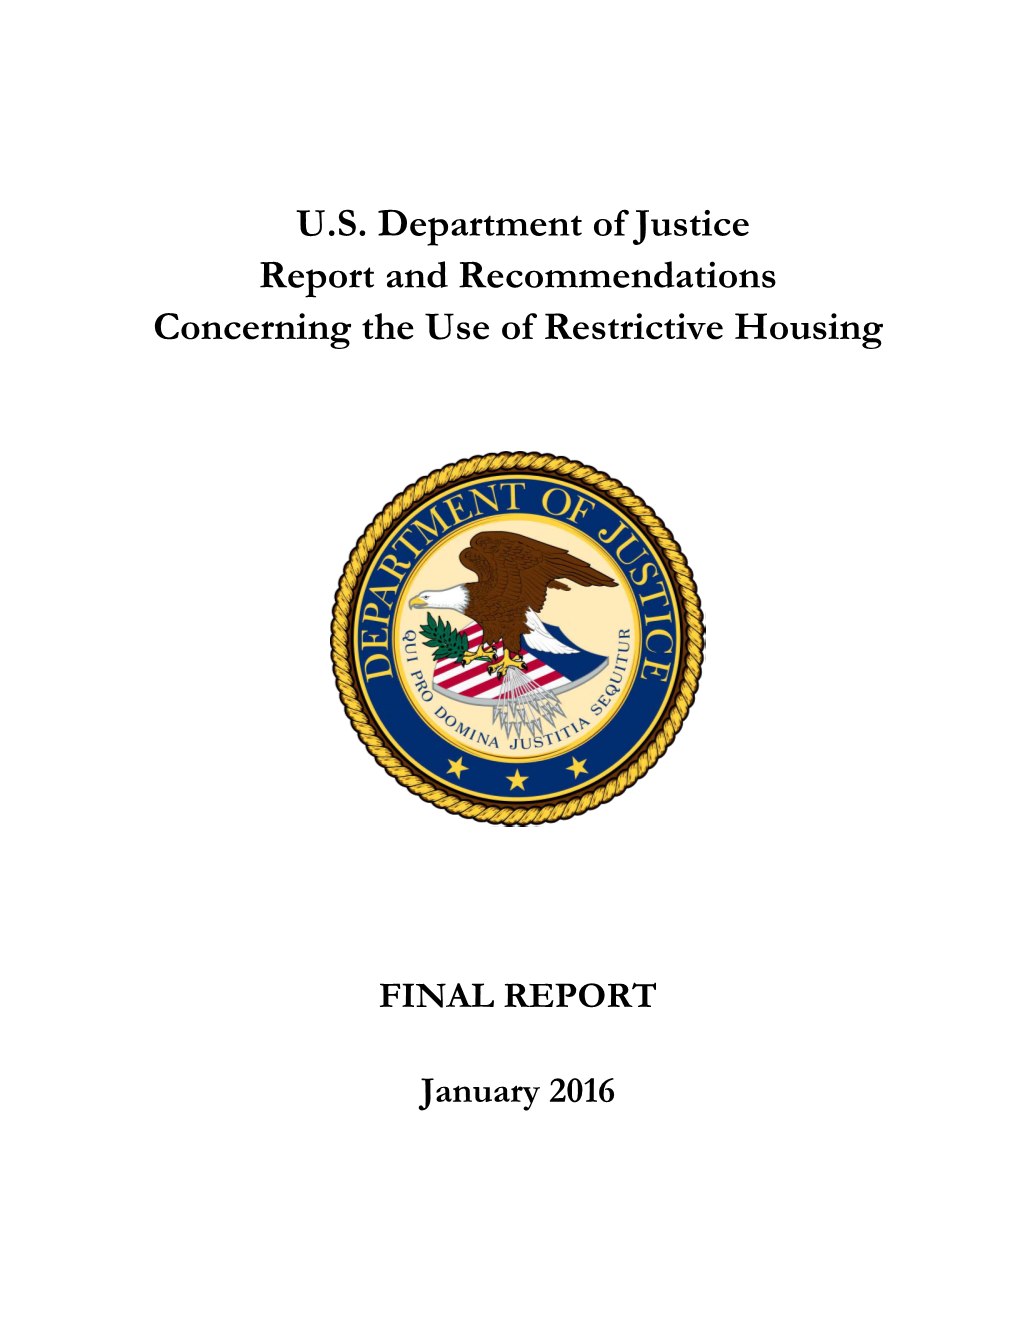 Report and Recommendations Concerning the Use of Restrictive Housing